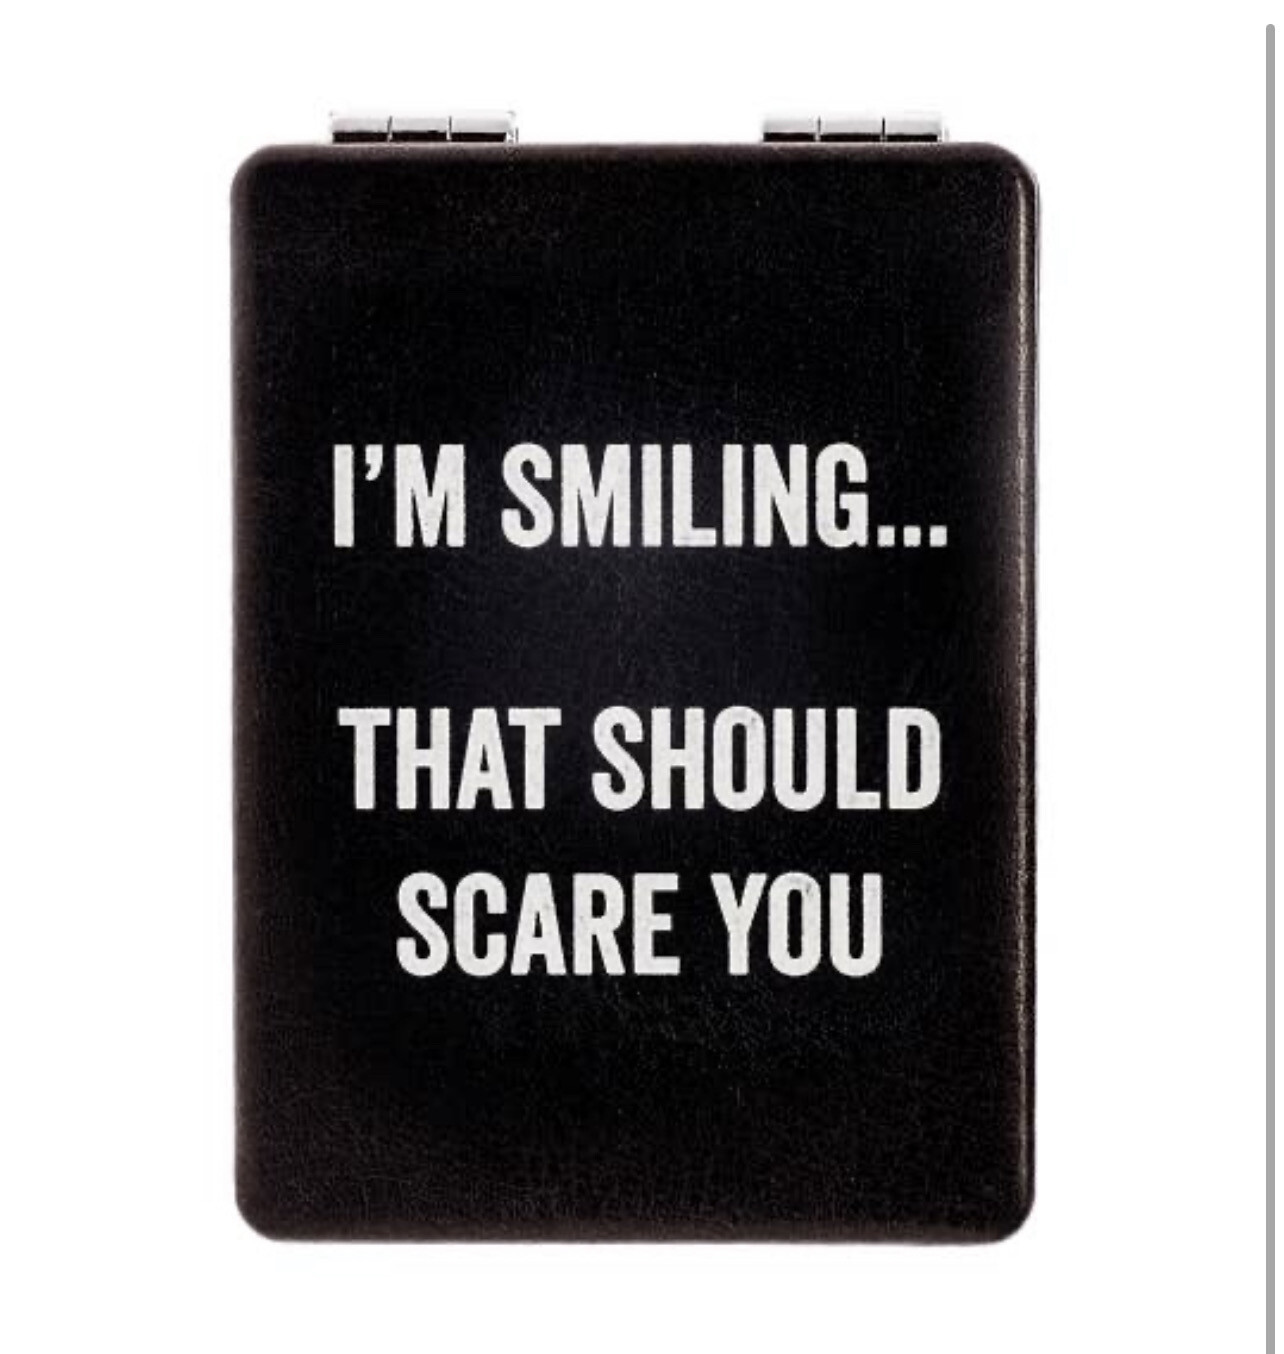 I’m Smiling…That Should Scare You Mirror